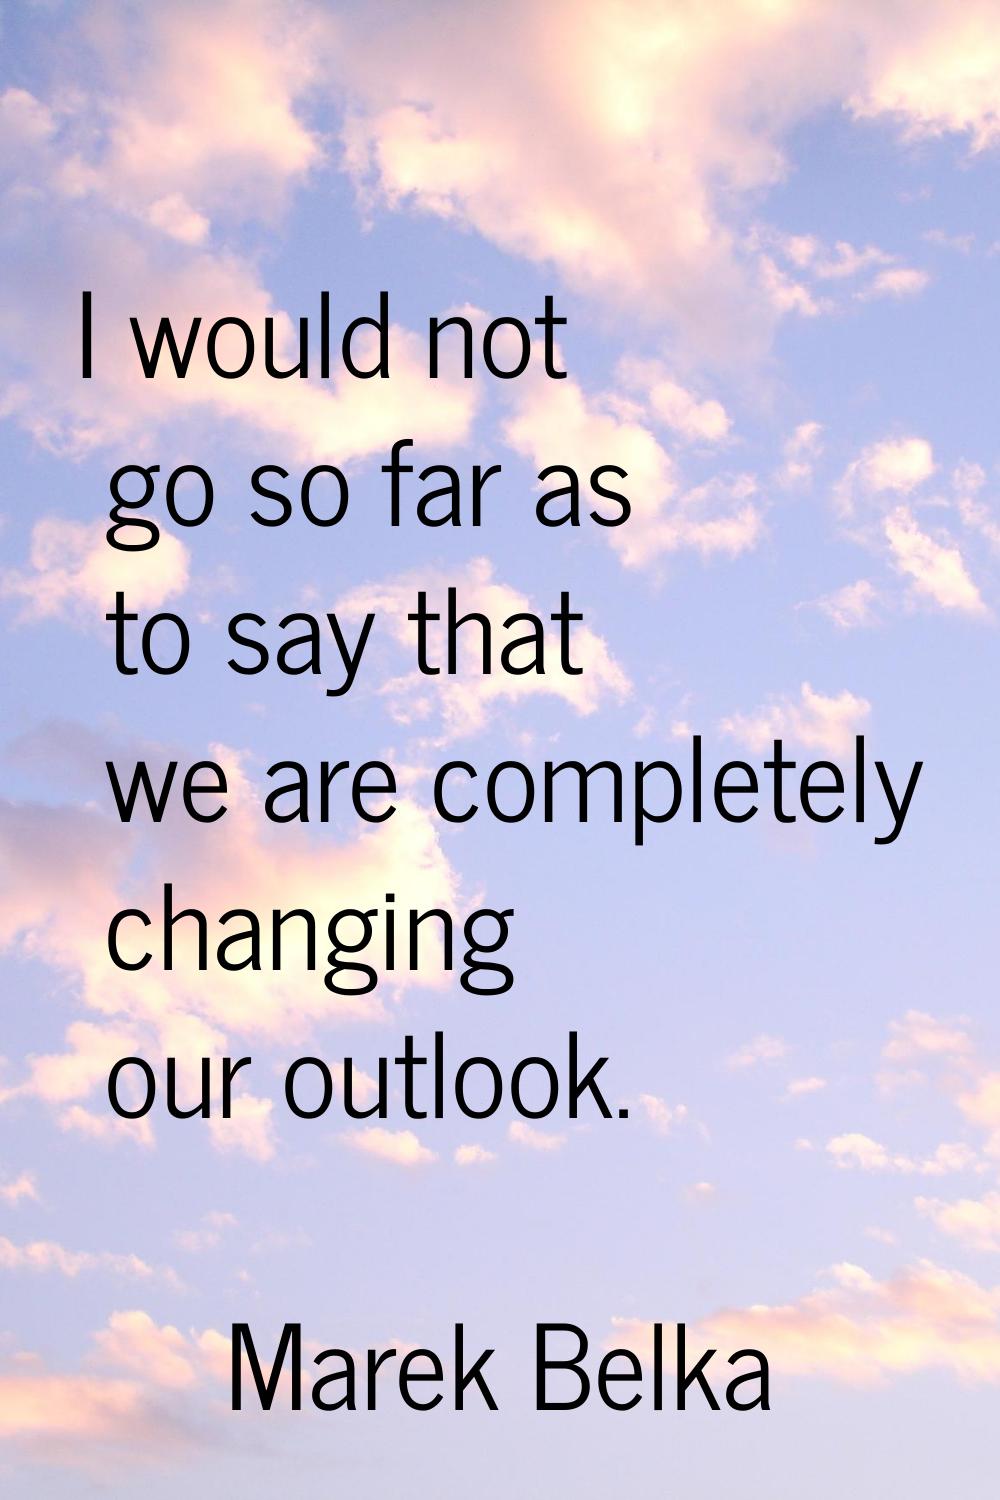 I would not go so far as to say that we are completely changing our outlook.